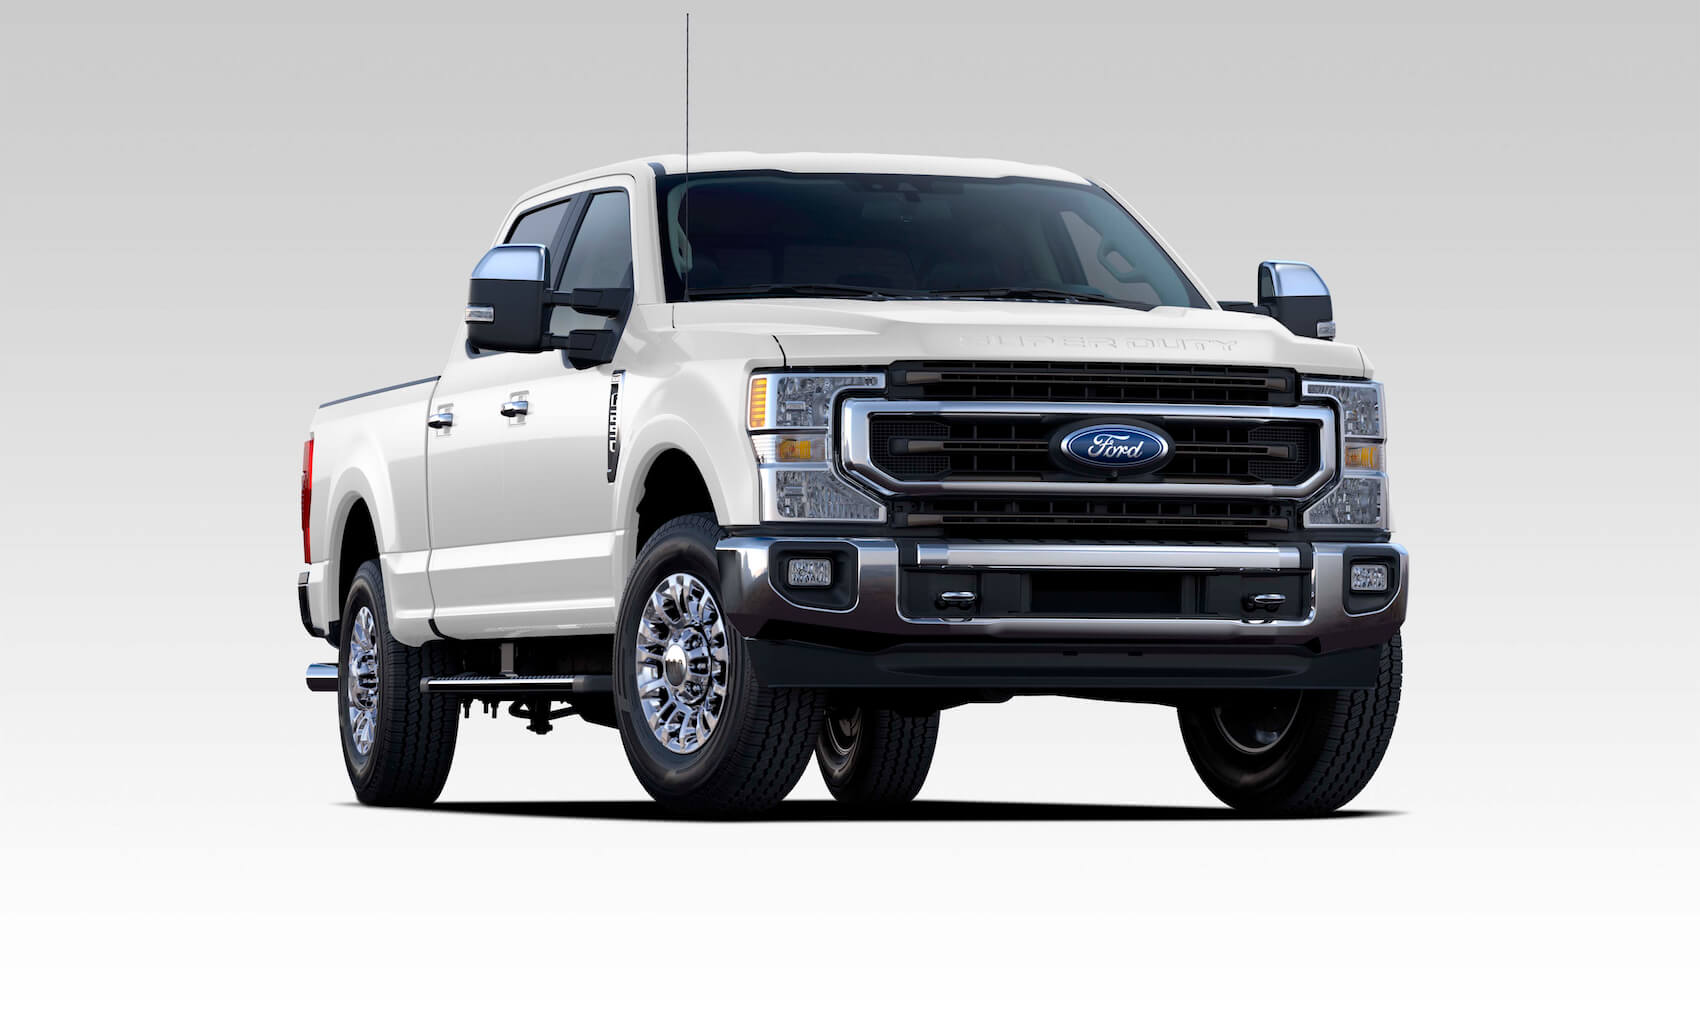 2020 Ford F-250 for lease near Pittston, PA